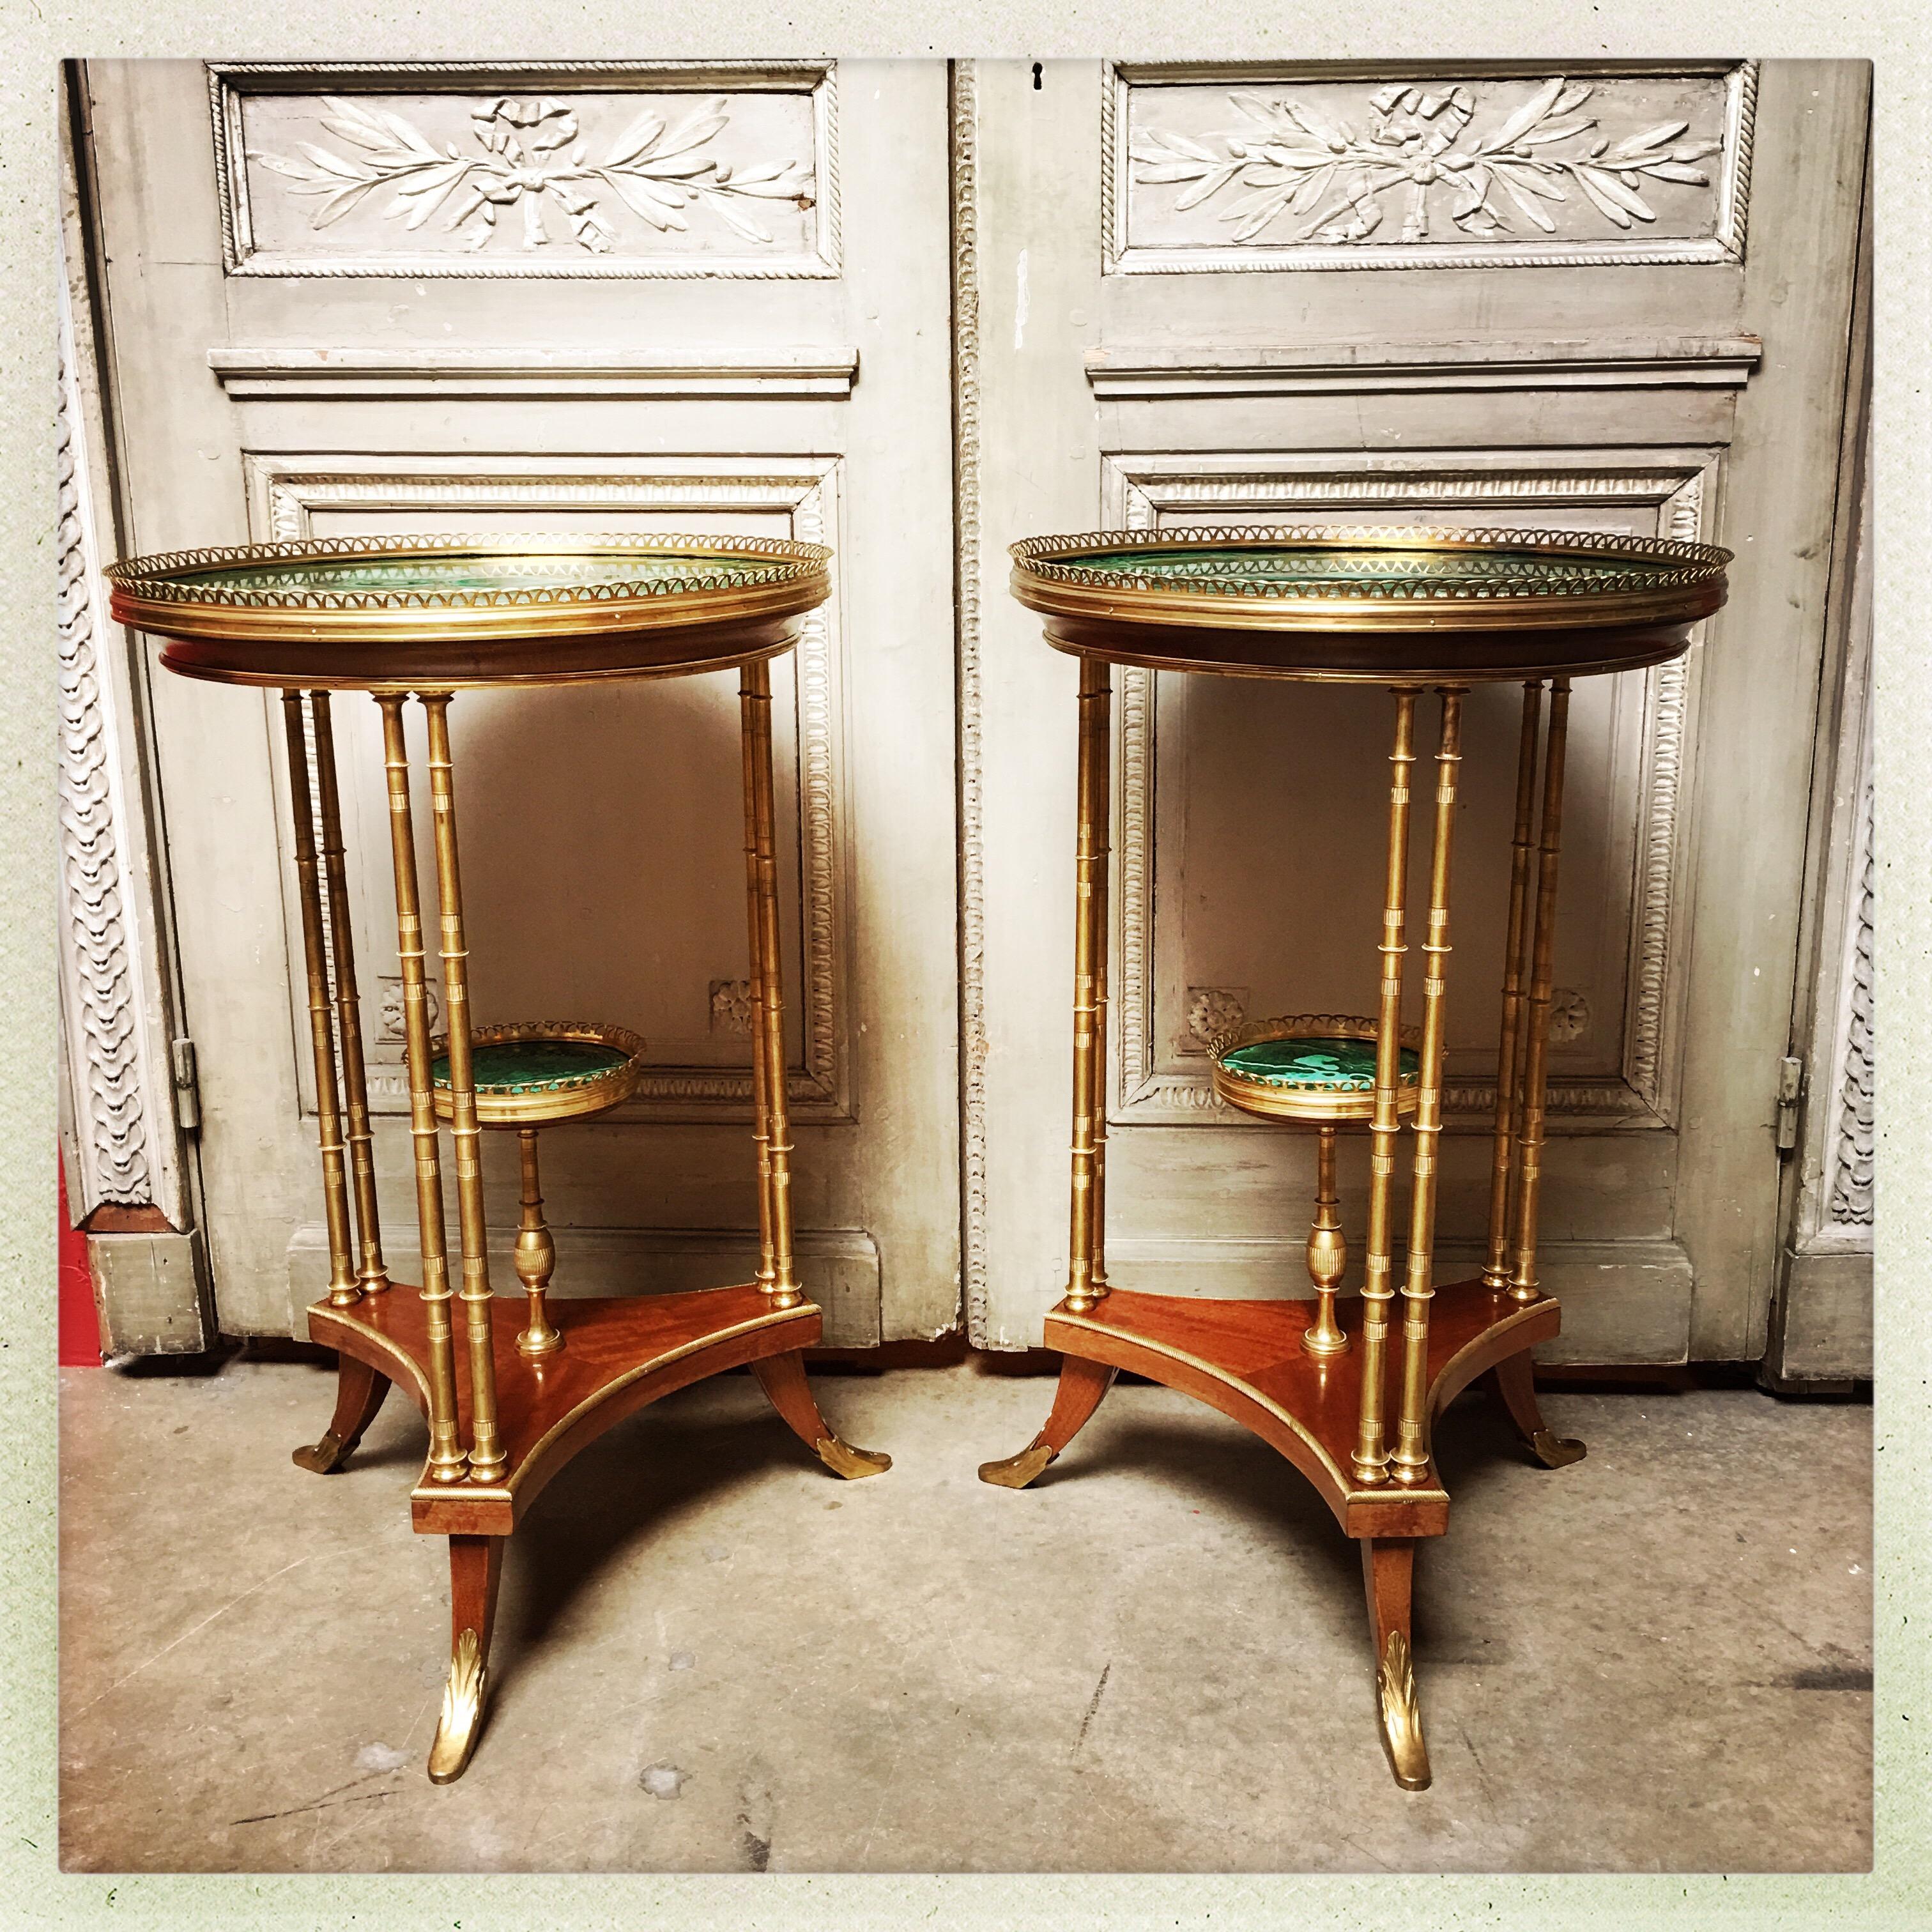 A pair of French Louis XVI style gueridon tables of bronze, mahogany and malachite of exceptional quality. Based on 18th century models by Adam Weisweiller.